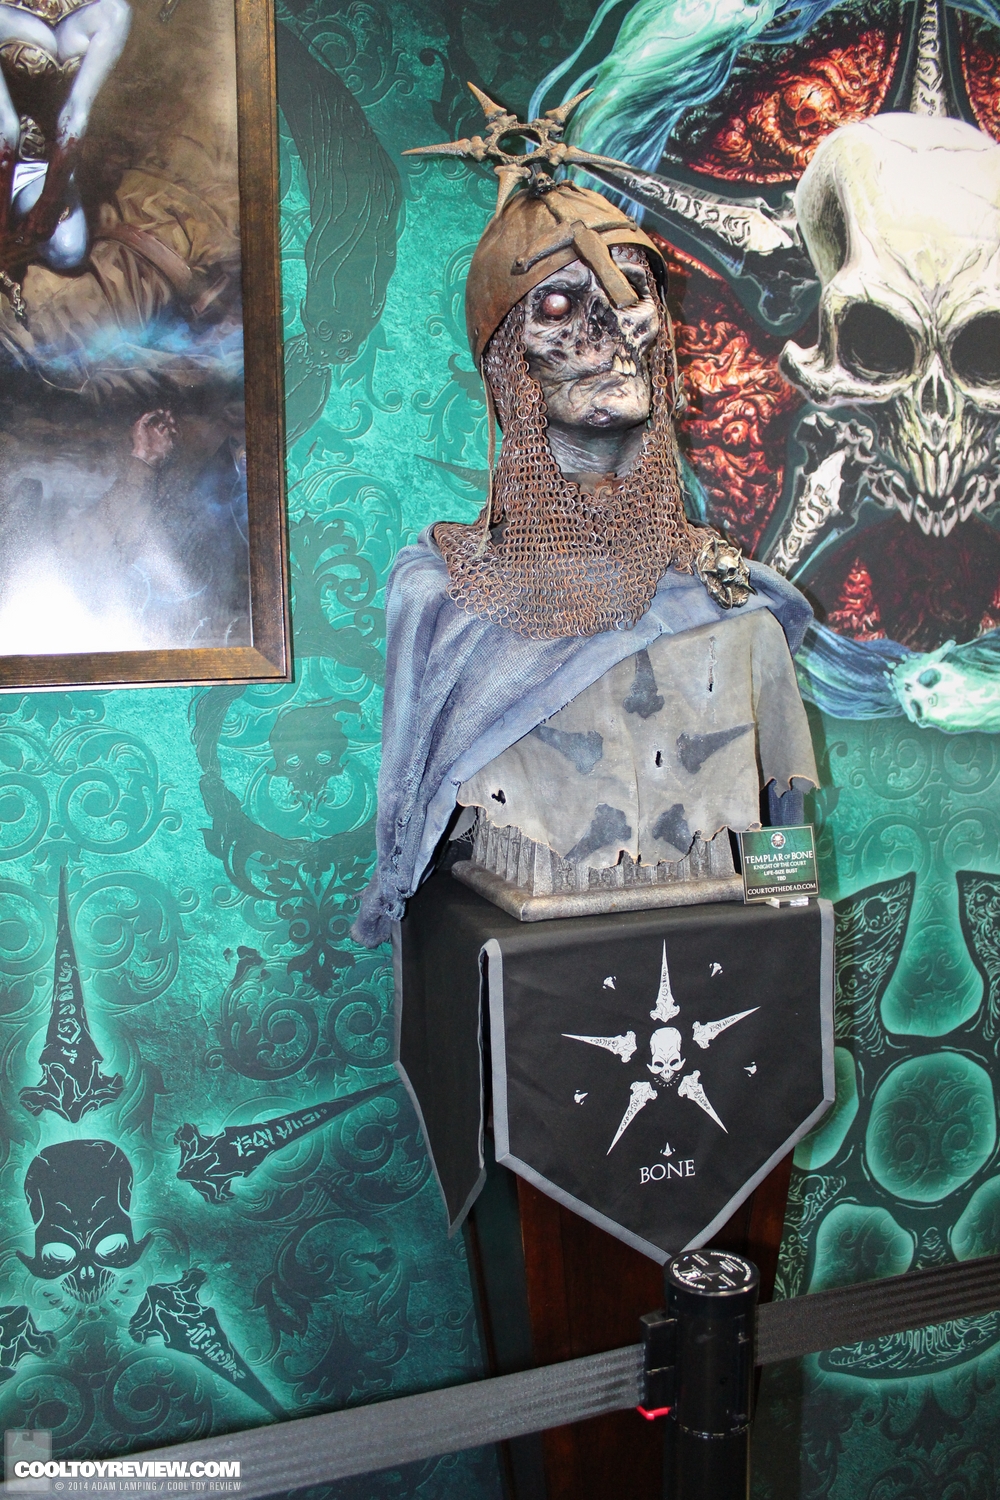 san-diego-comic-con-2014-sideshow-collectibles-court-of-the-dead-027.JPG